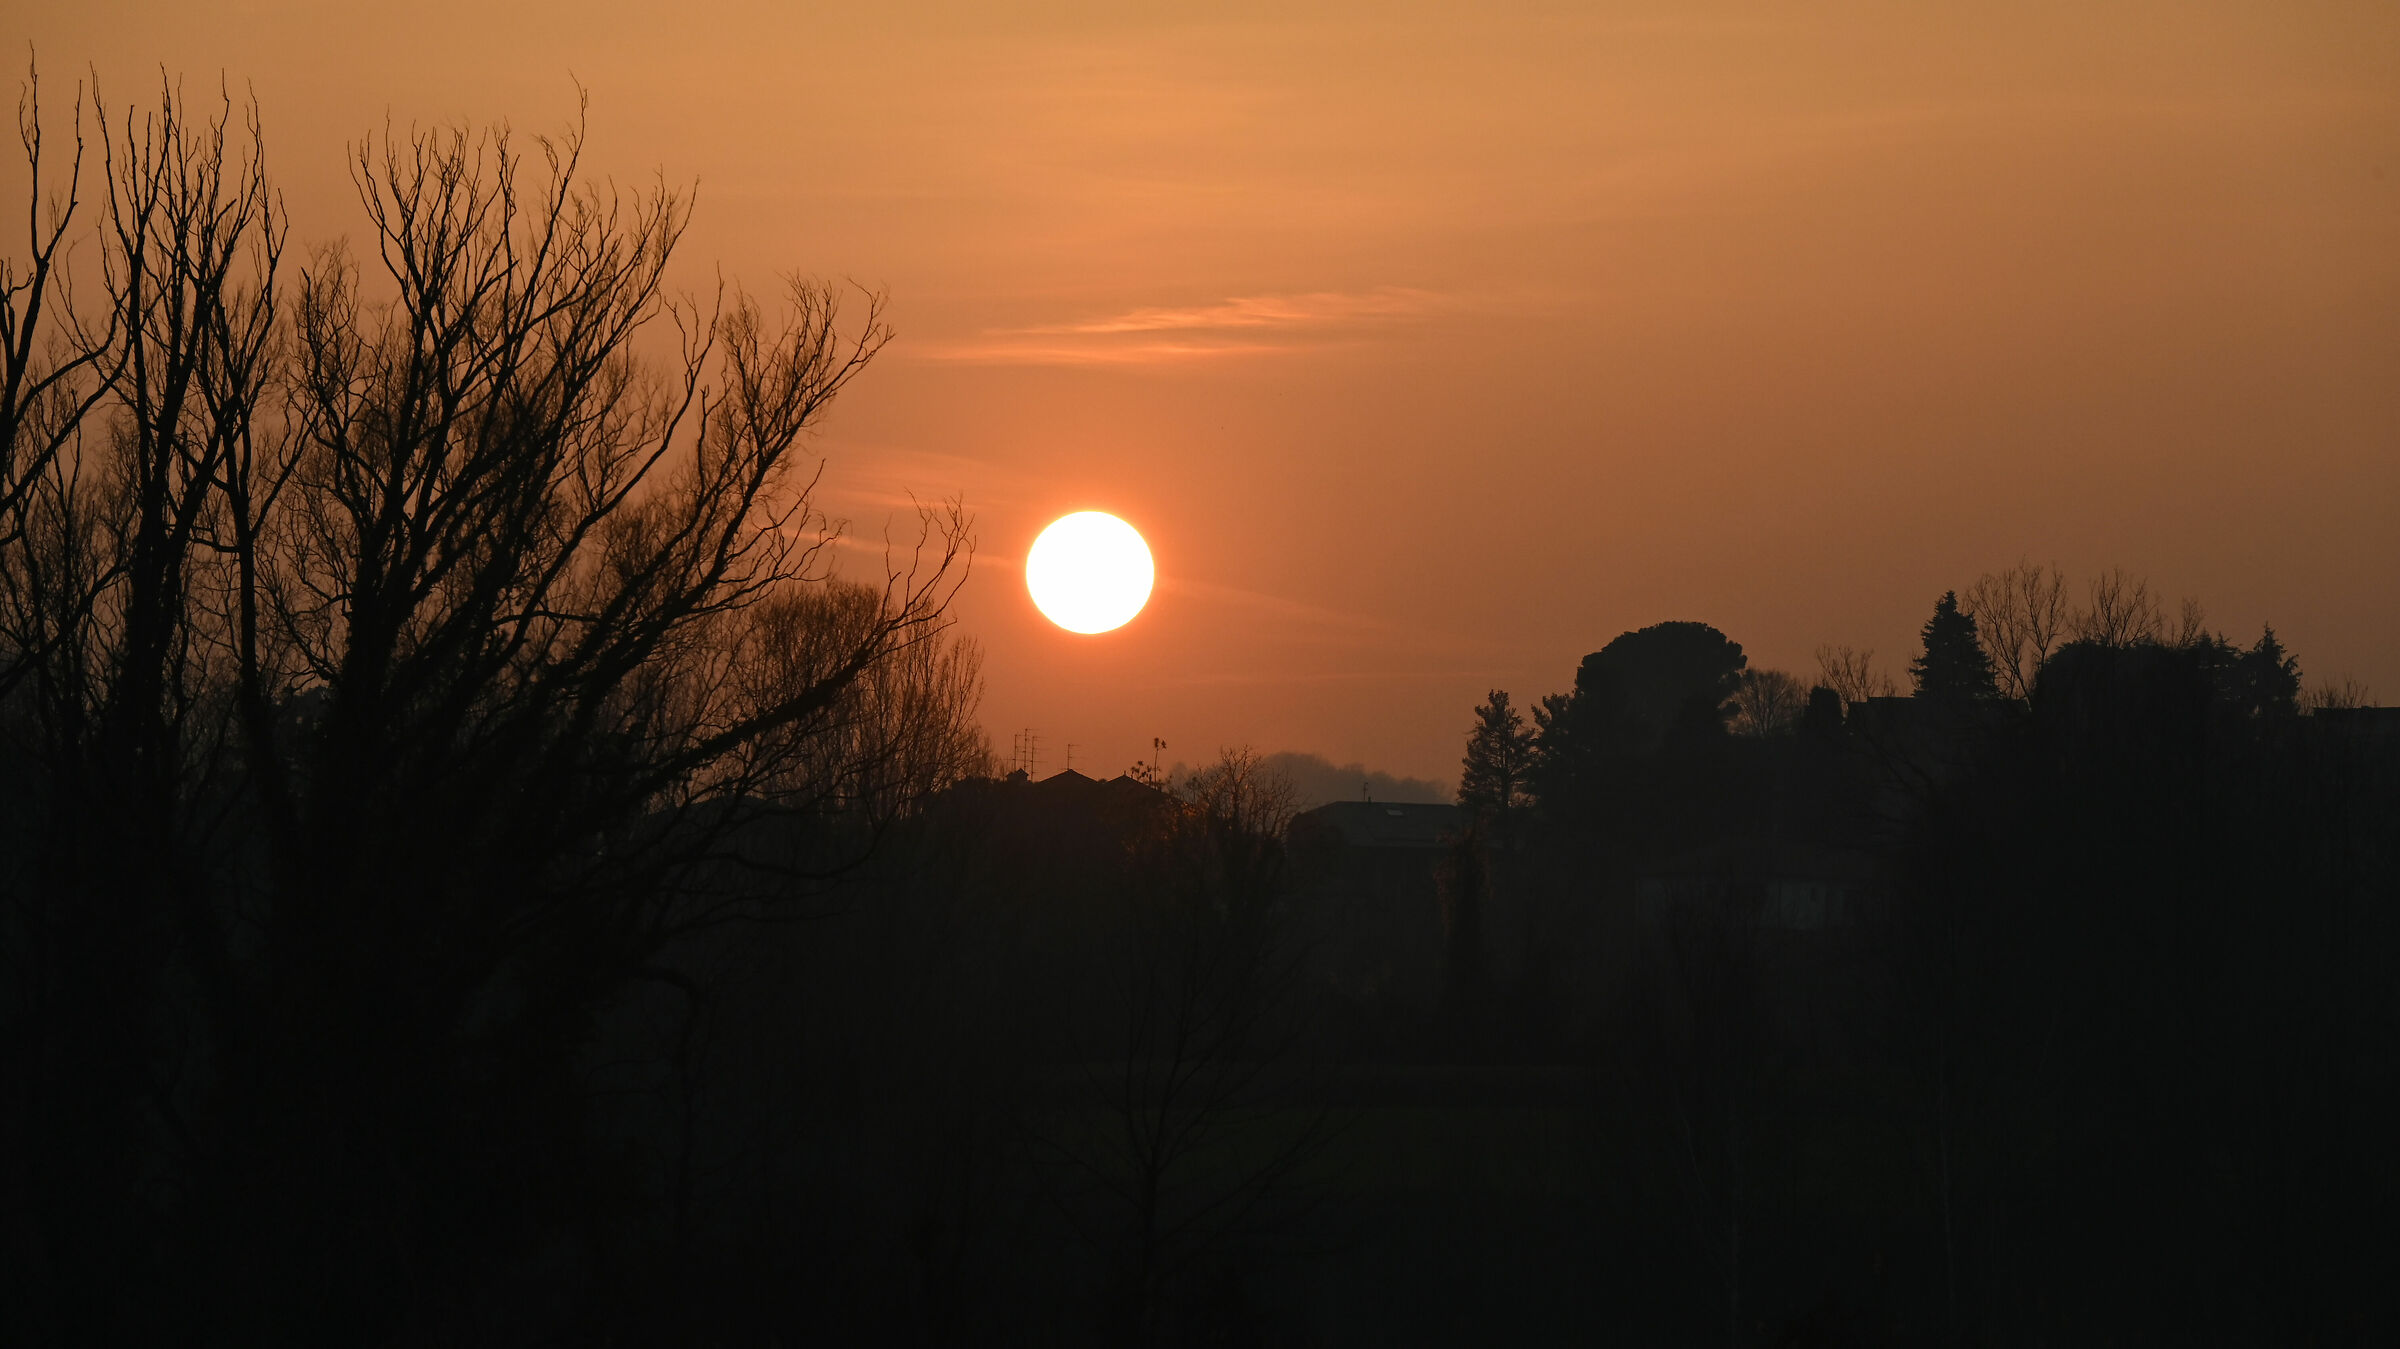 Winter sunset in the Lombardy countryside...